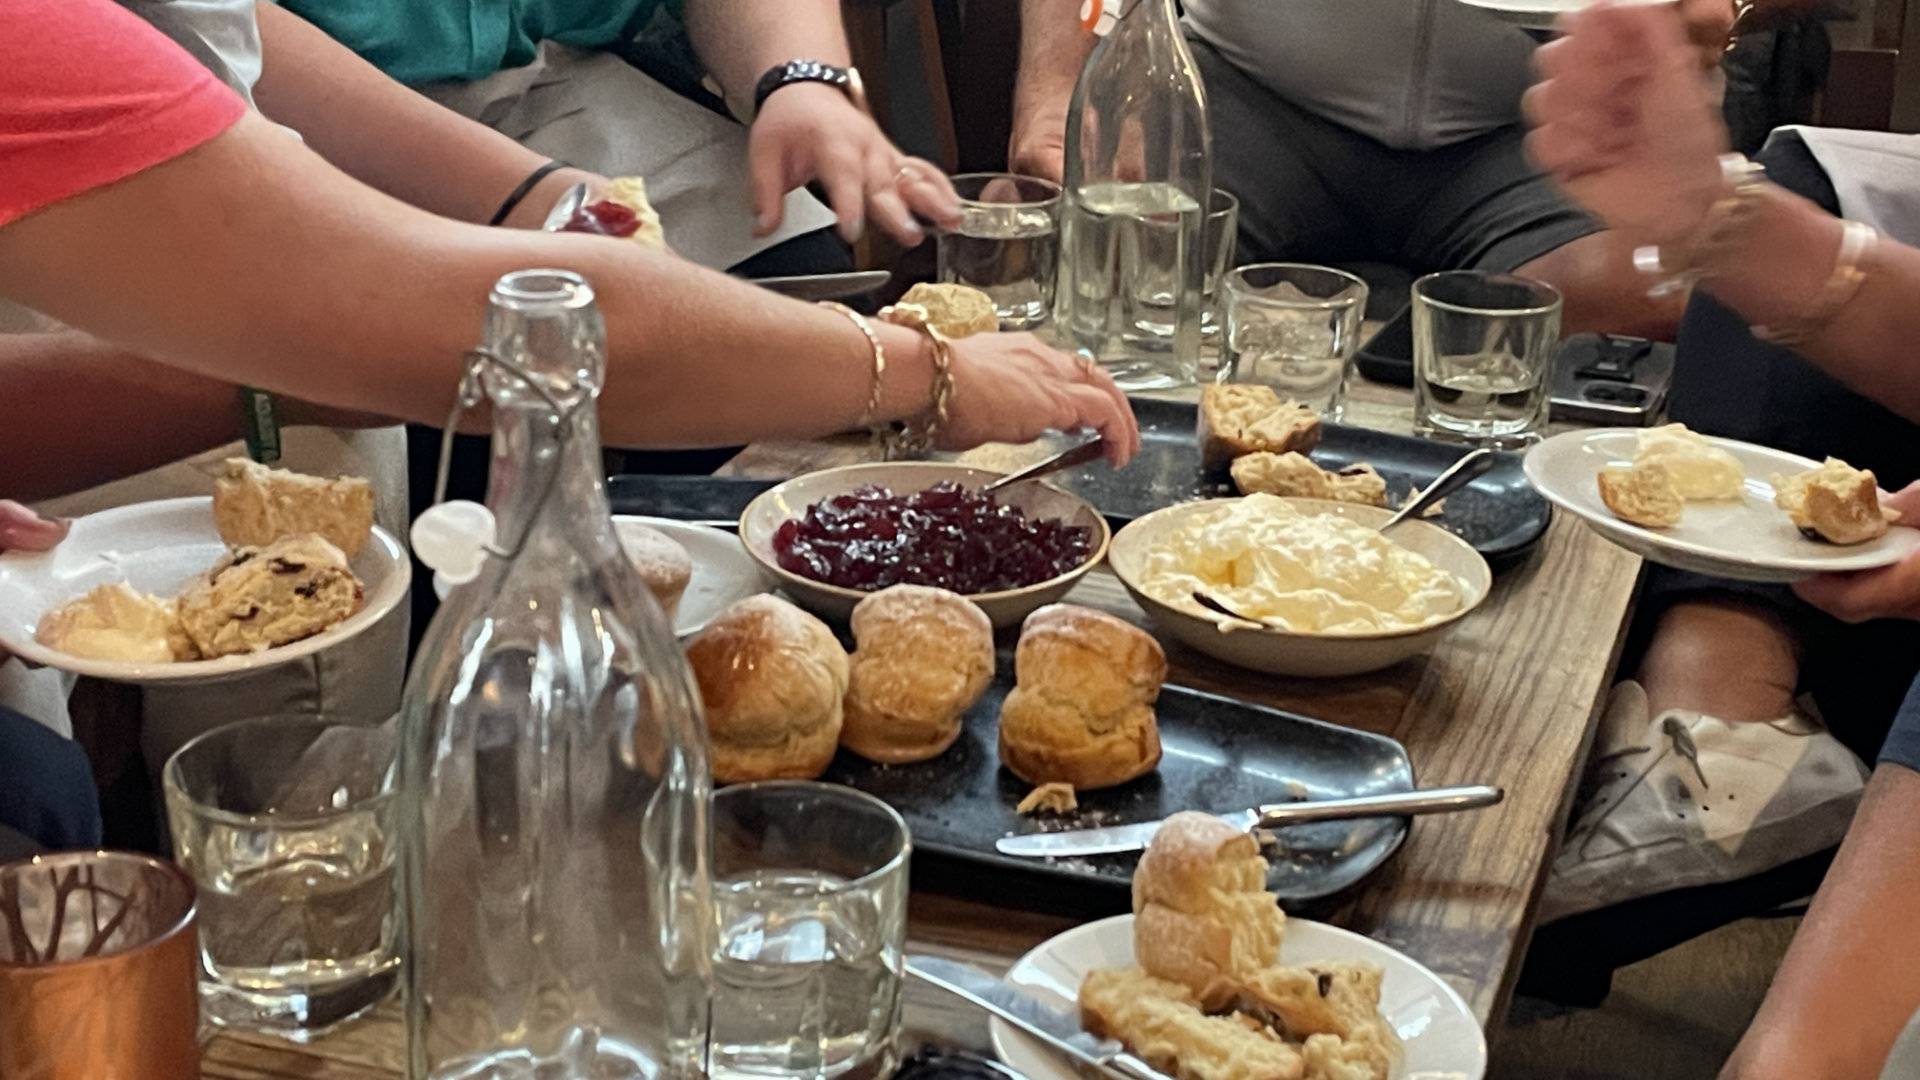 Scones, warm from the oven served with whipped cream and strawberry jam - always a hit on Edinburgh Food Safari, Nell Nelson - image